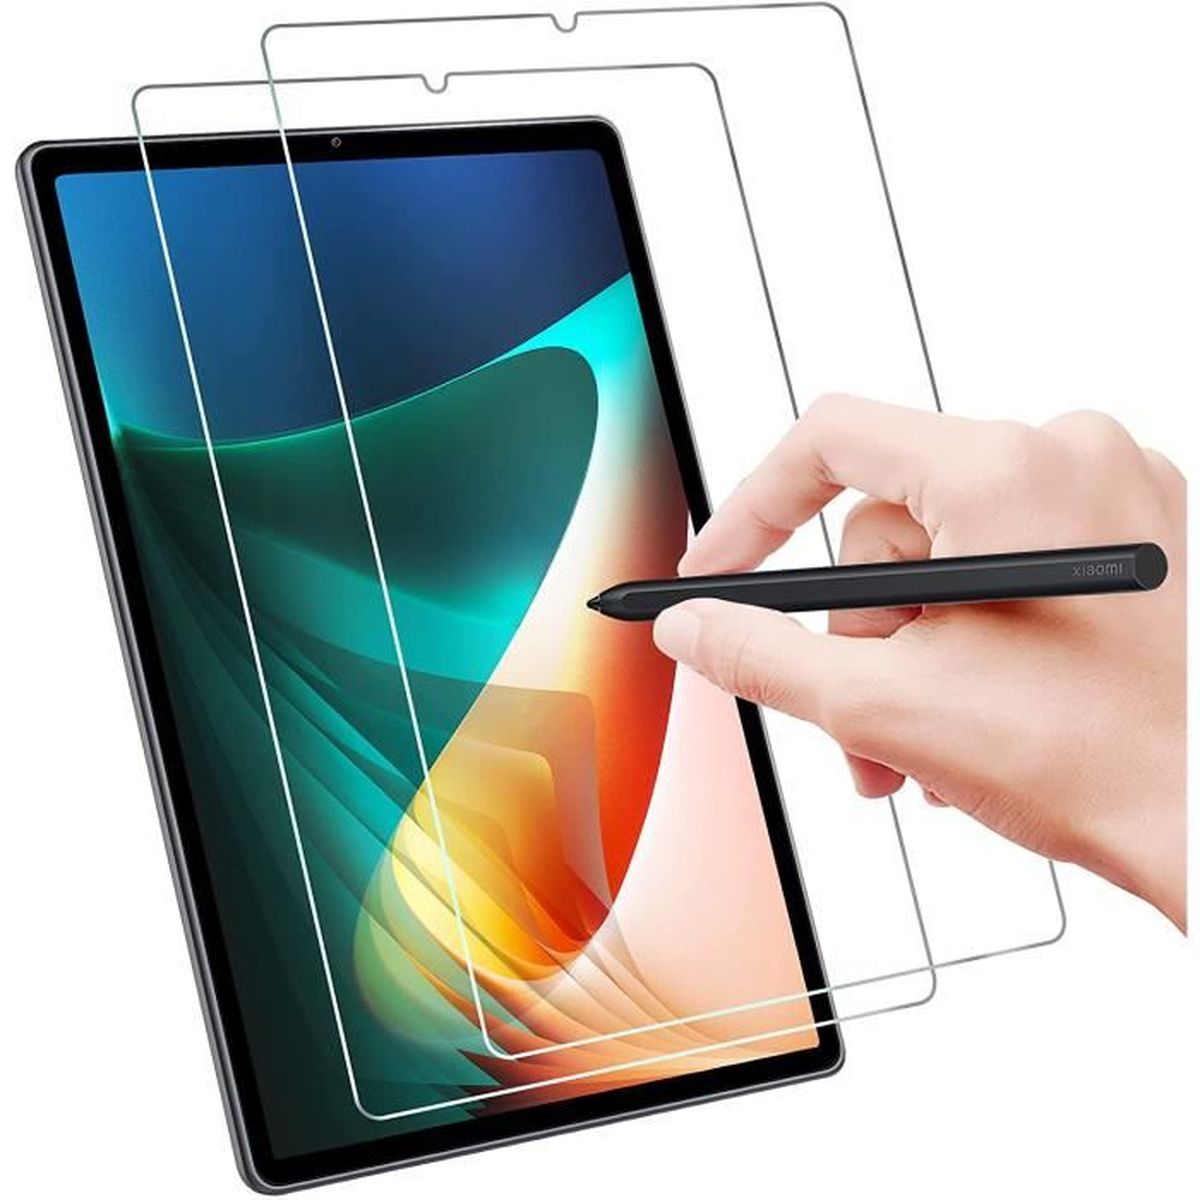 OPPO PAD AIR 4GB + 128GB GREY - Tablette tactile - Achat & prix